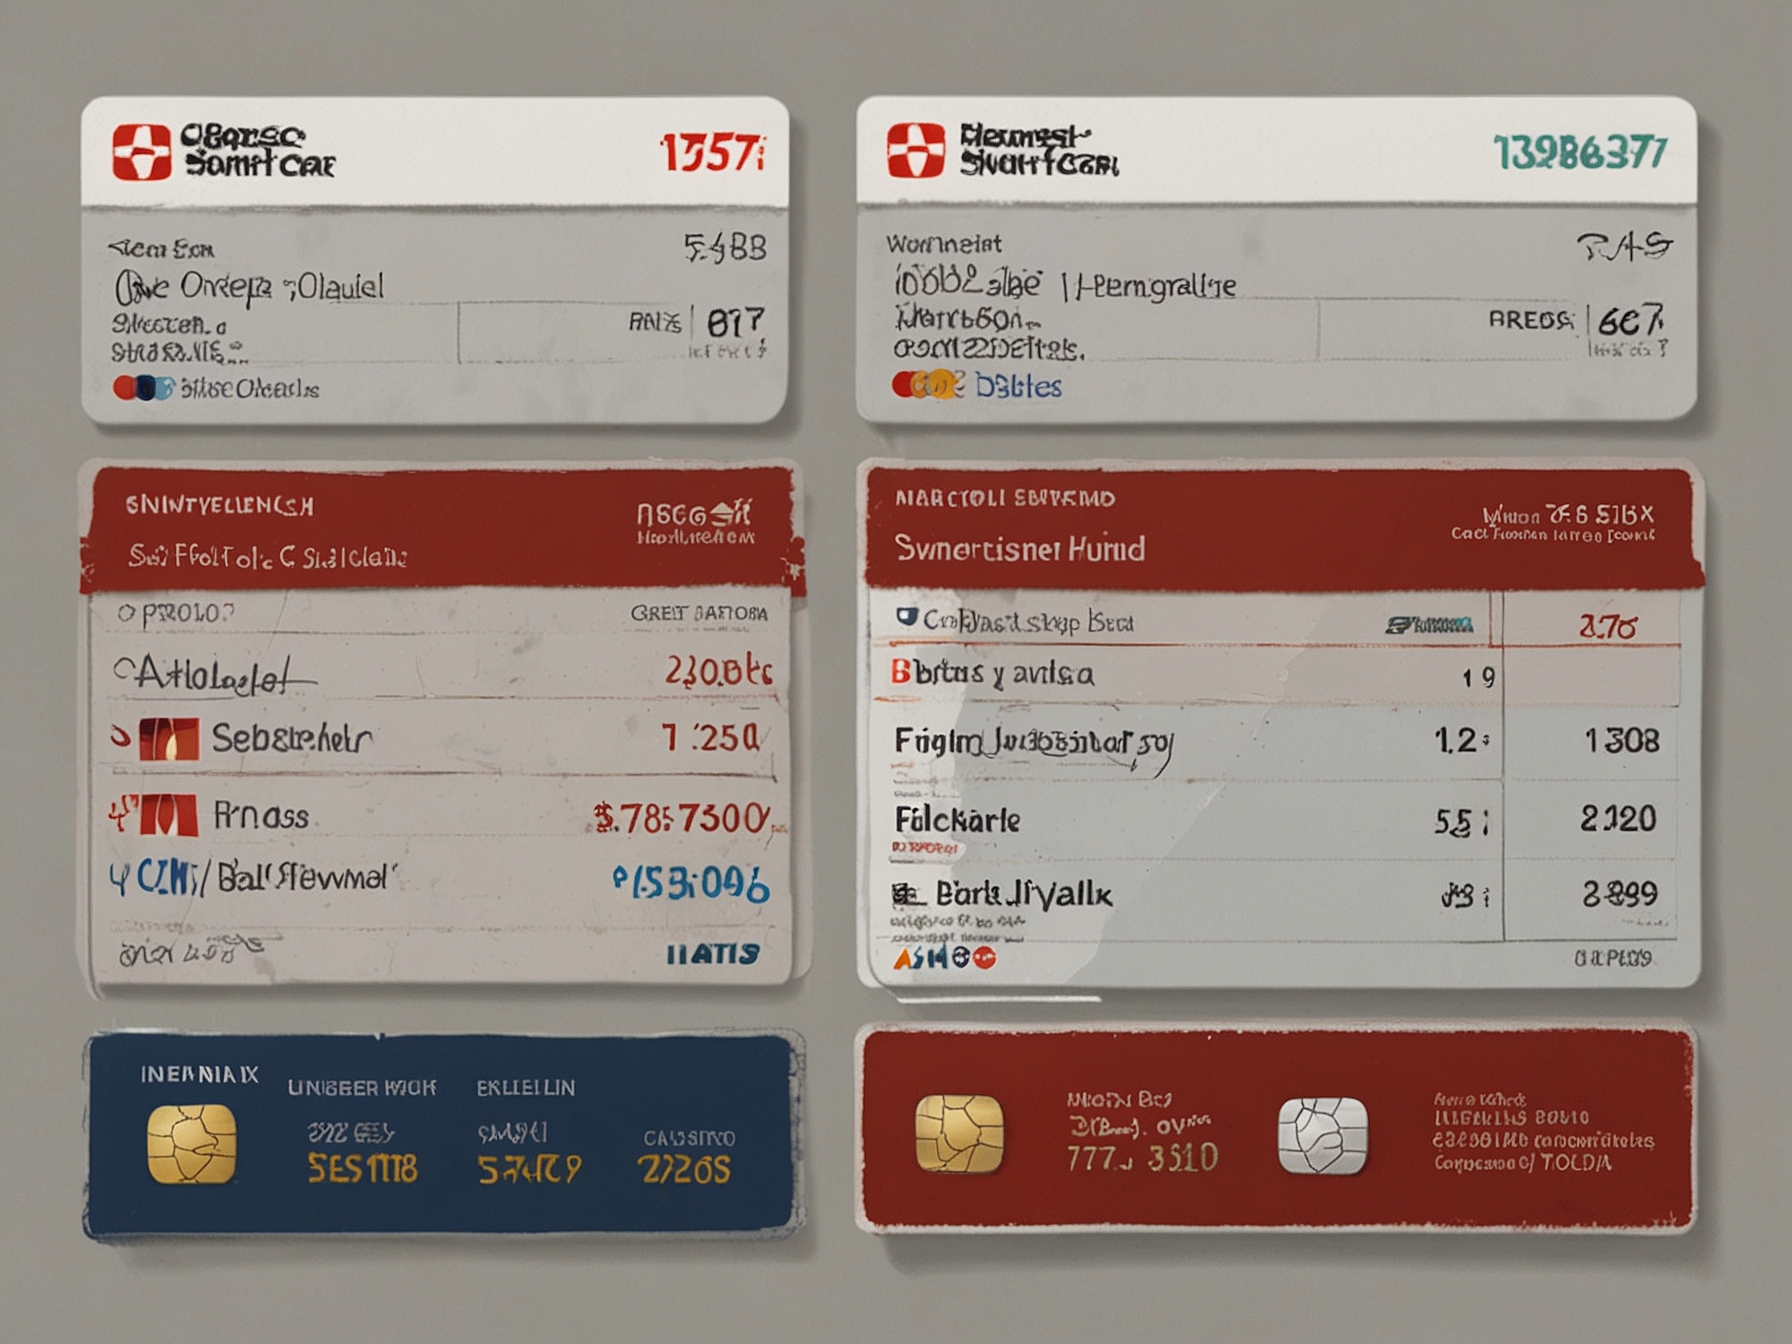 A screenshot of the MoneySmart website showing detailed comparisons of HSBC credit card benefits, highlighting its user-friendly interface and informative tools.